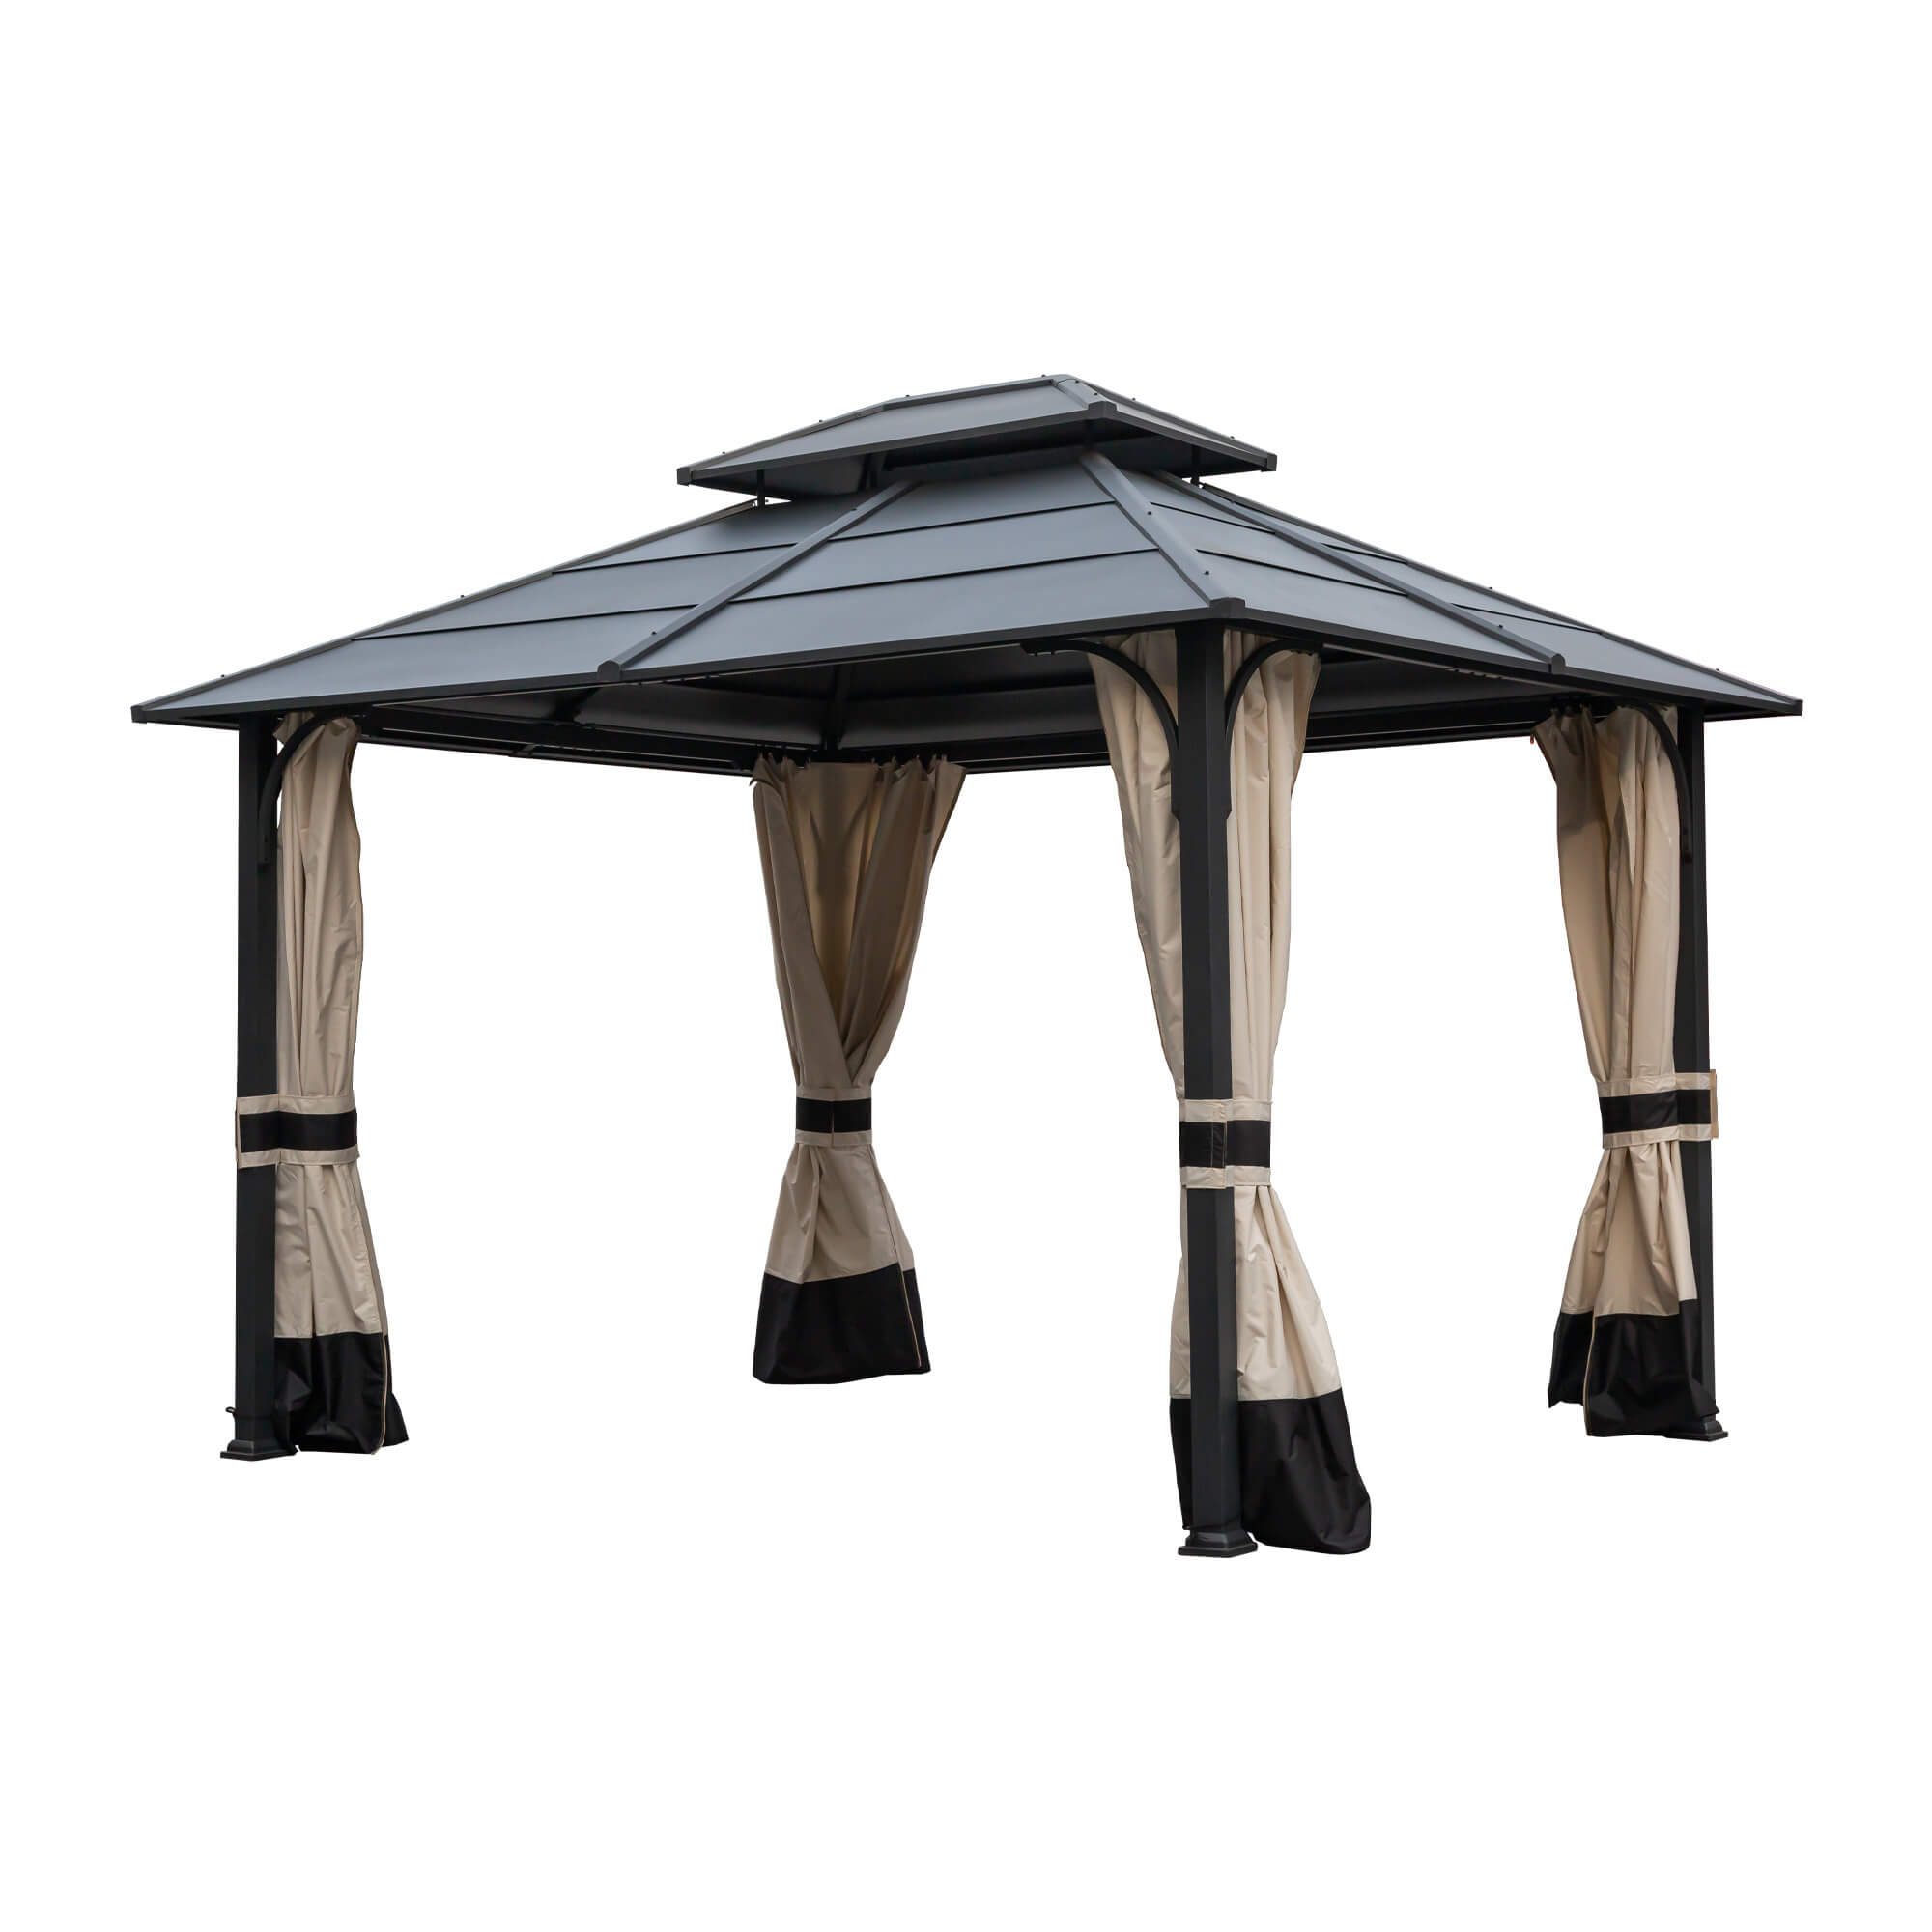 10x12 Feet Double-Top Hardtop Gazebo Canopy Outdoor Iron Roof with Mosquito Net for Patio Garden